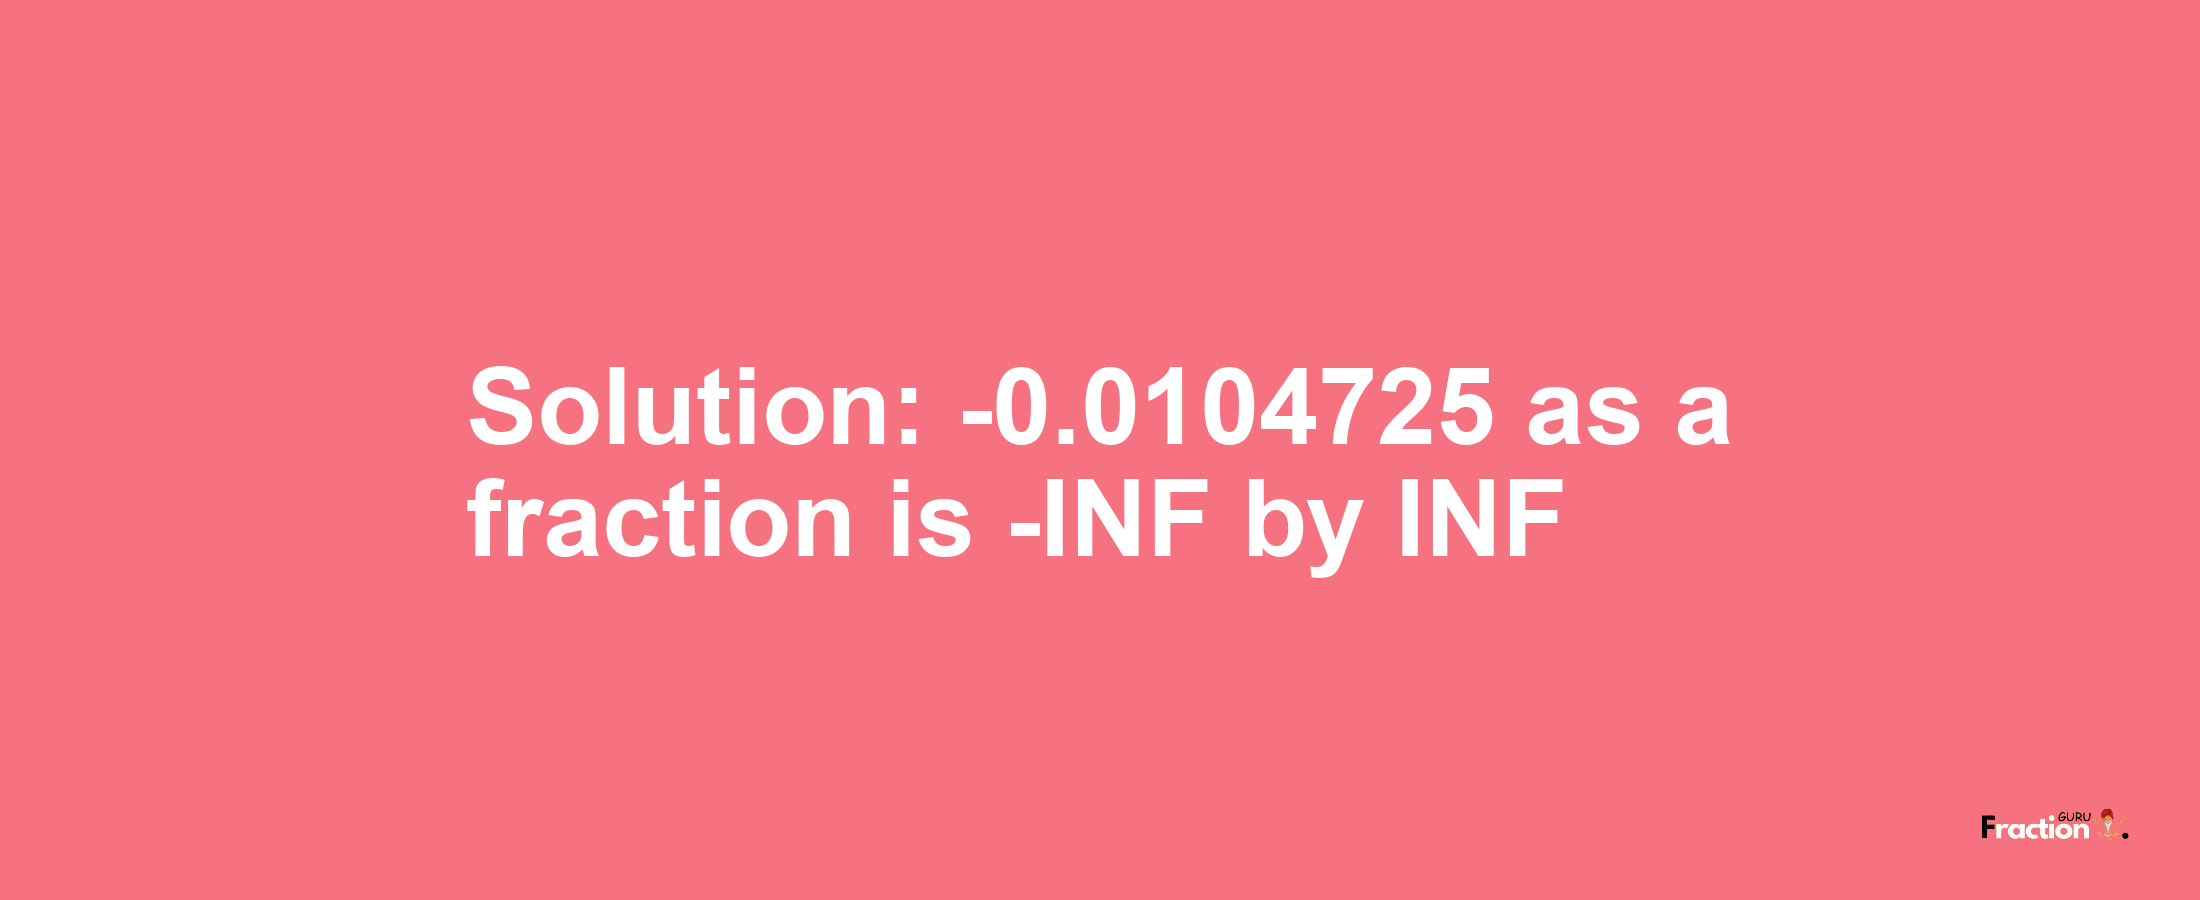 Solution:-0.0104725 as a fraction is -INF/INF